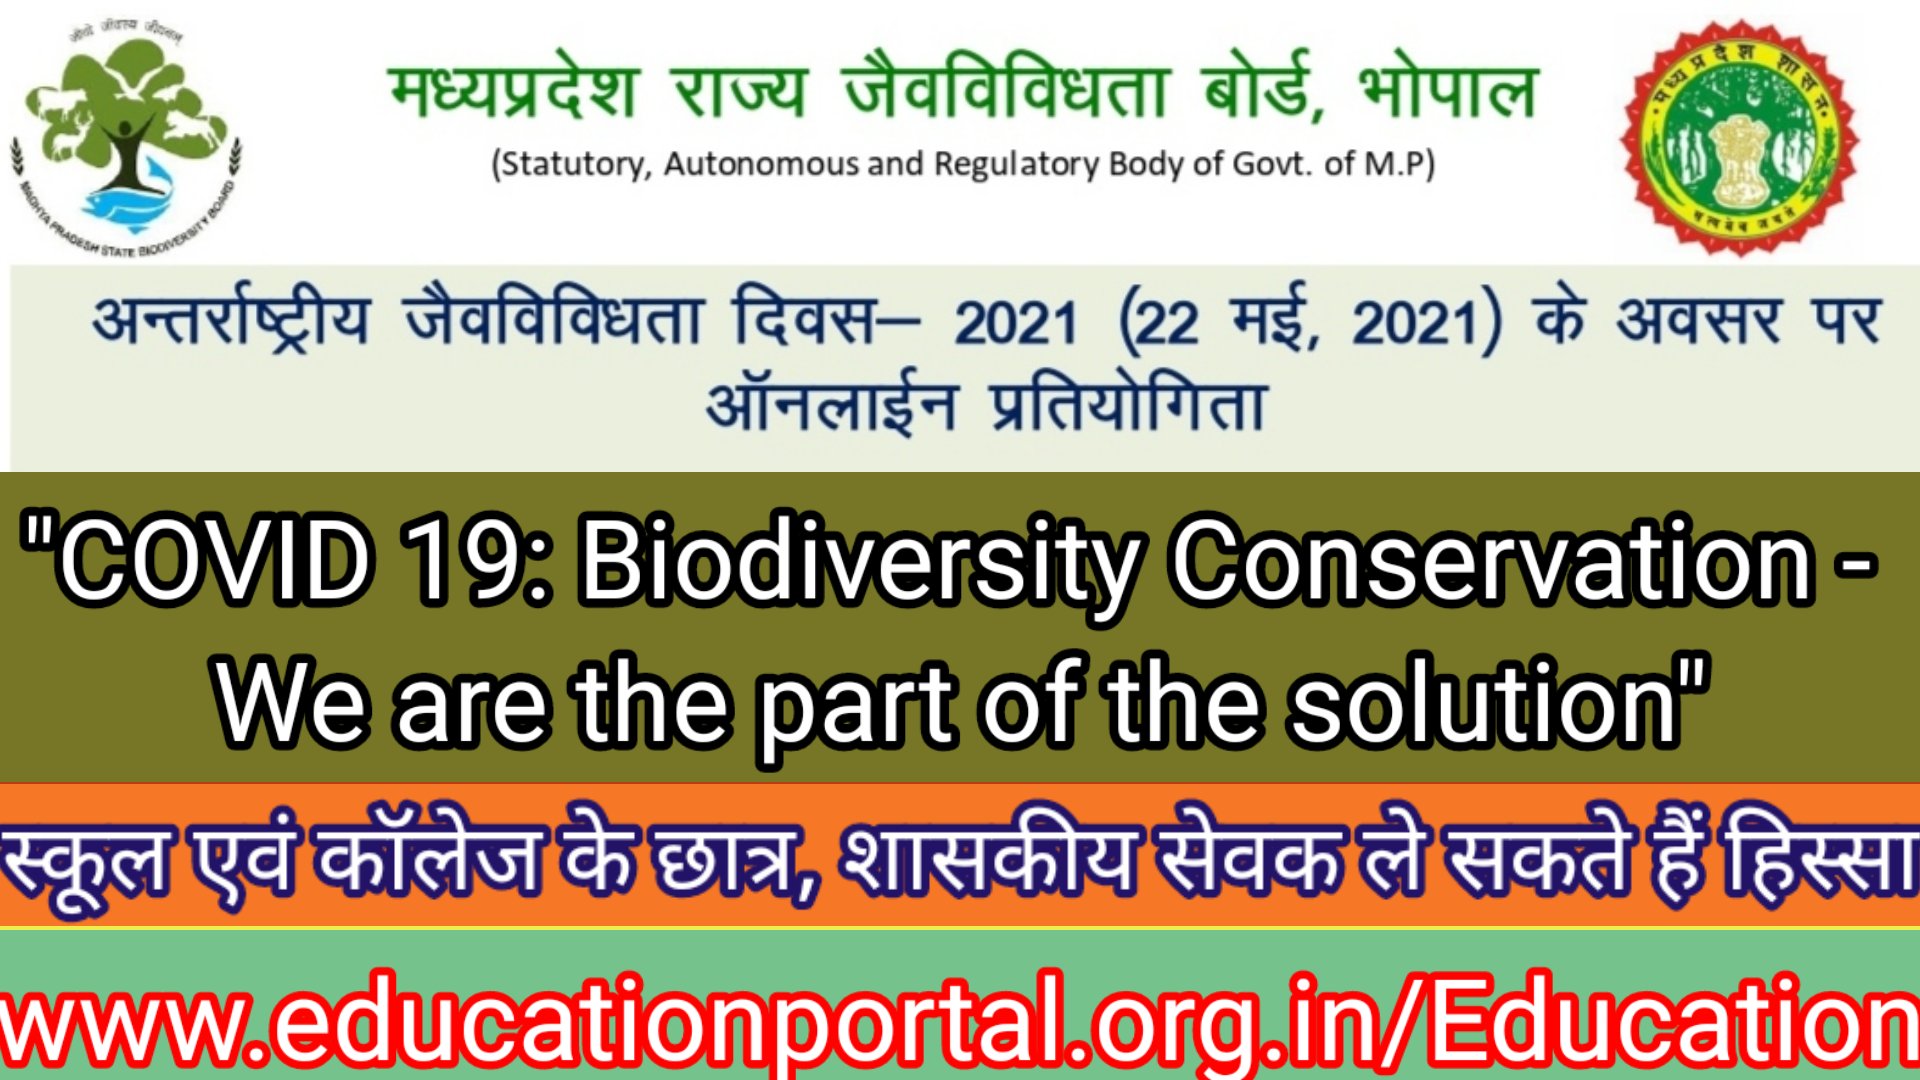 International Biodiversity Day Competition Online competition on the occasion of International Biodiversity Day - 2021 (May 22, 2021) "COVID 19: Biodiversity Conservation - We are the part of the solution"